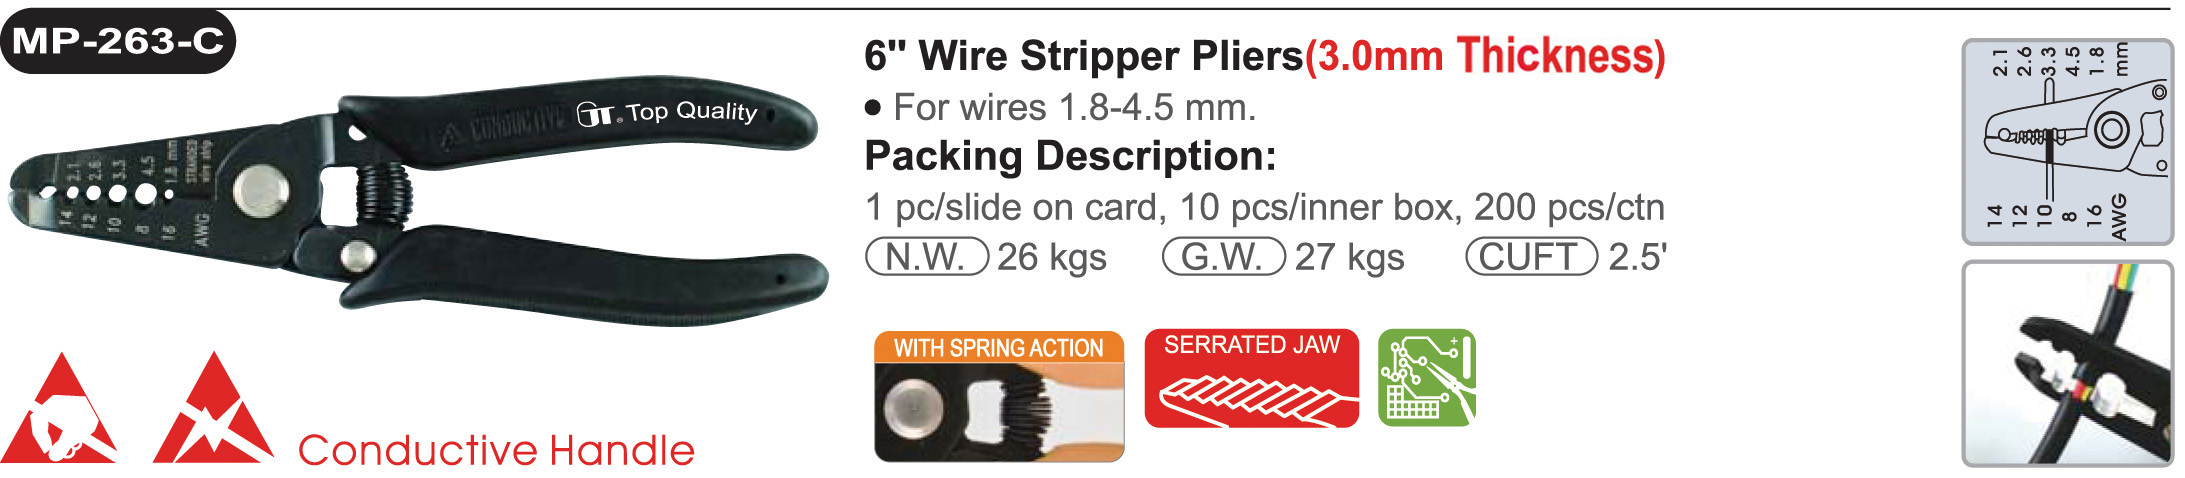 proimages/product/pliers/wire_strippers/ELECTRONICS_WIRE_STRIPPER_ESD/MP-263C/MP-263-C.jpg